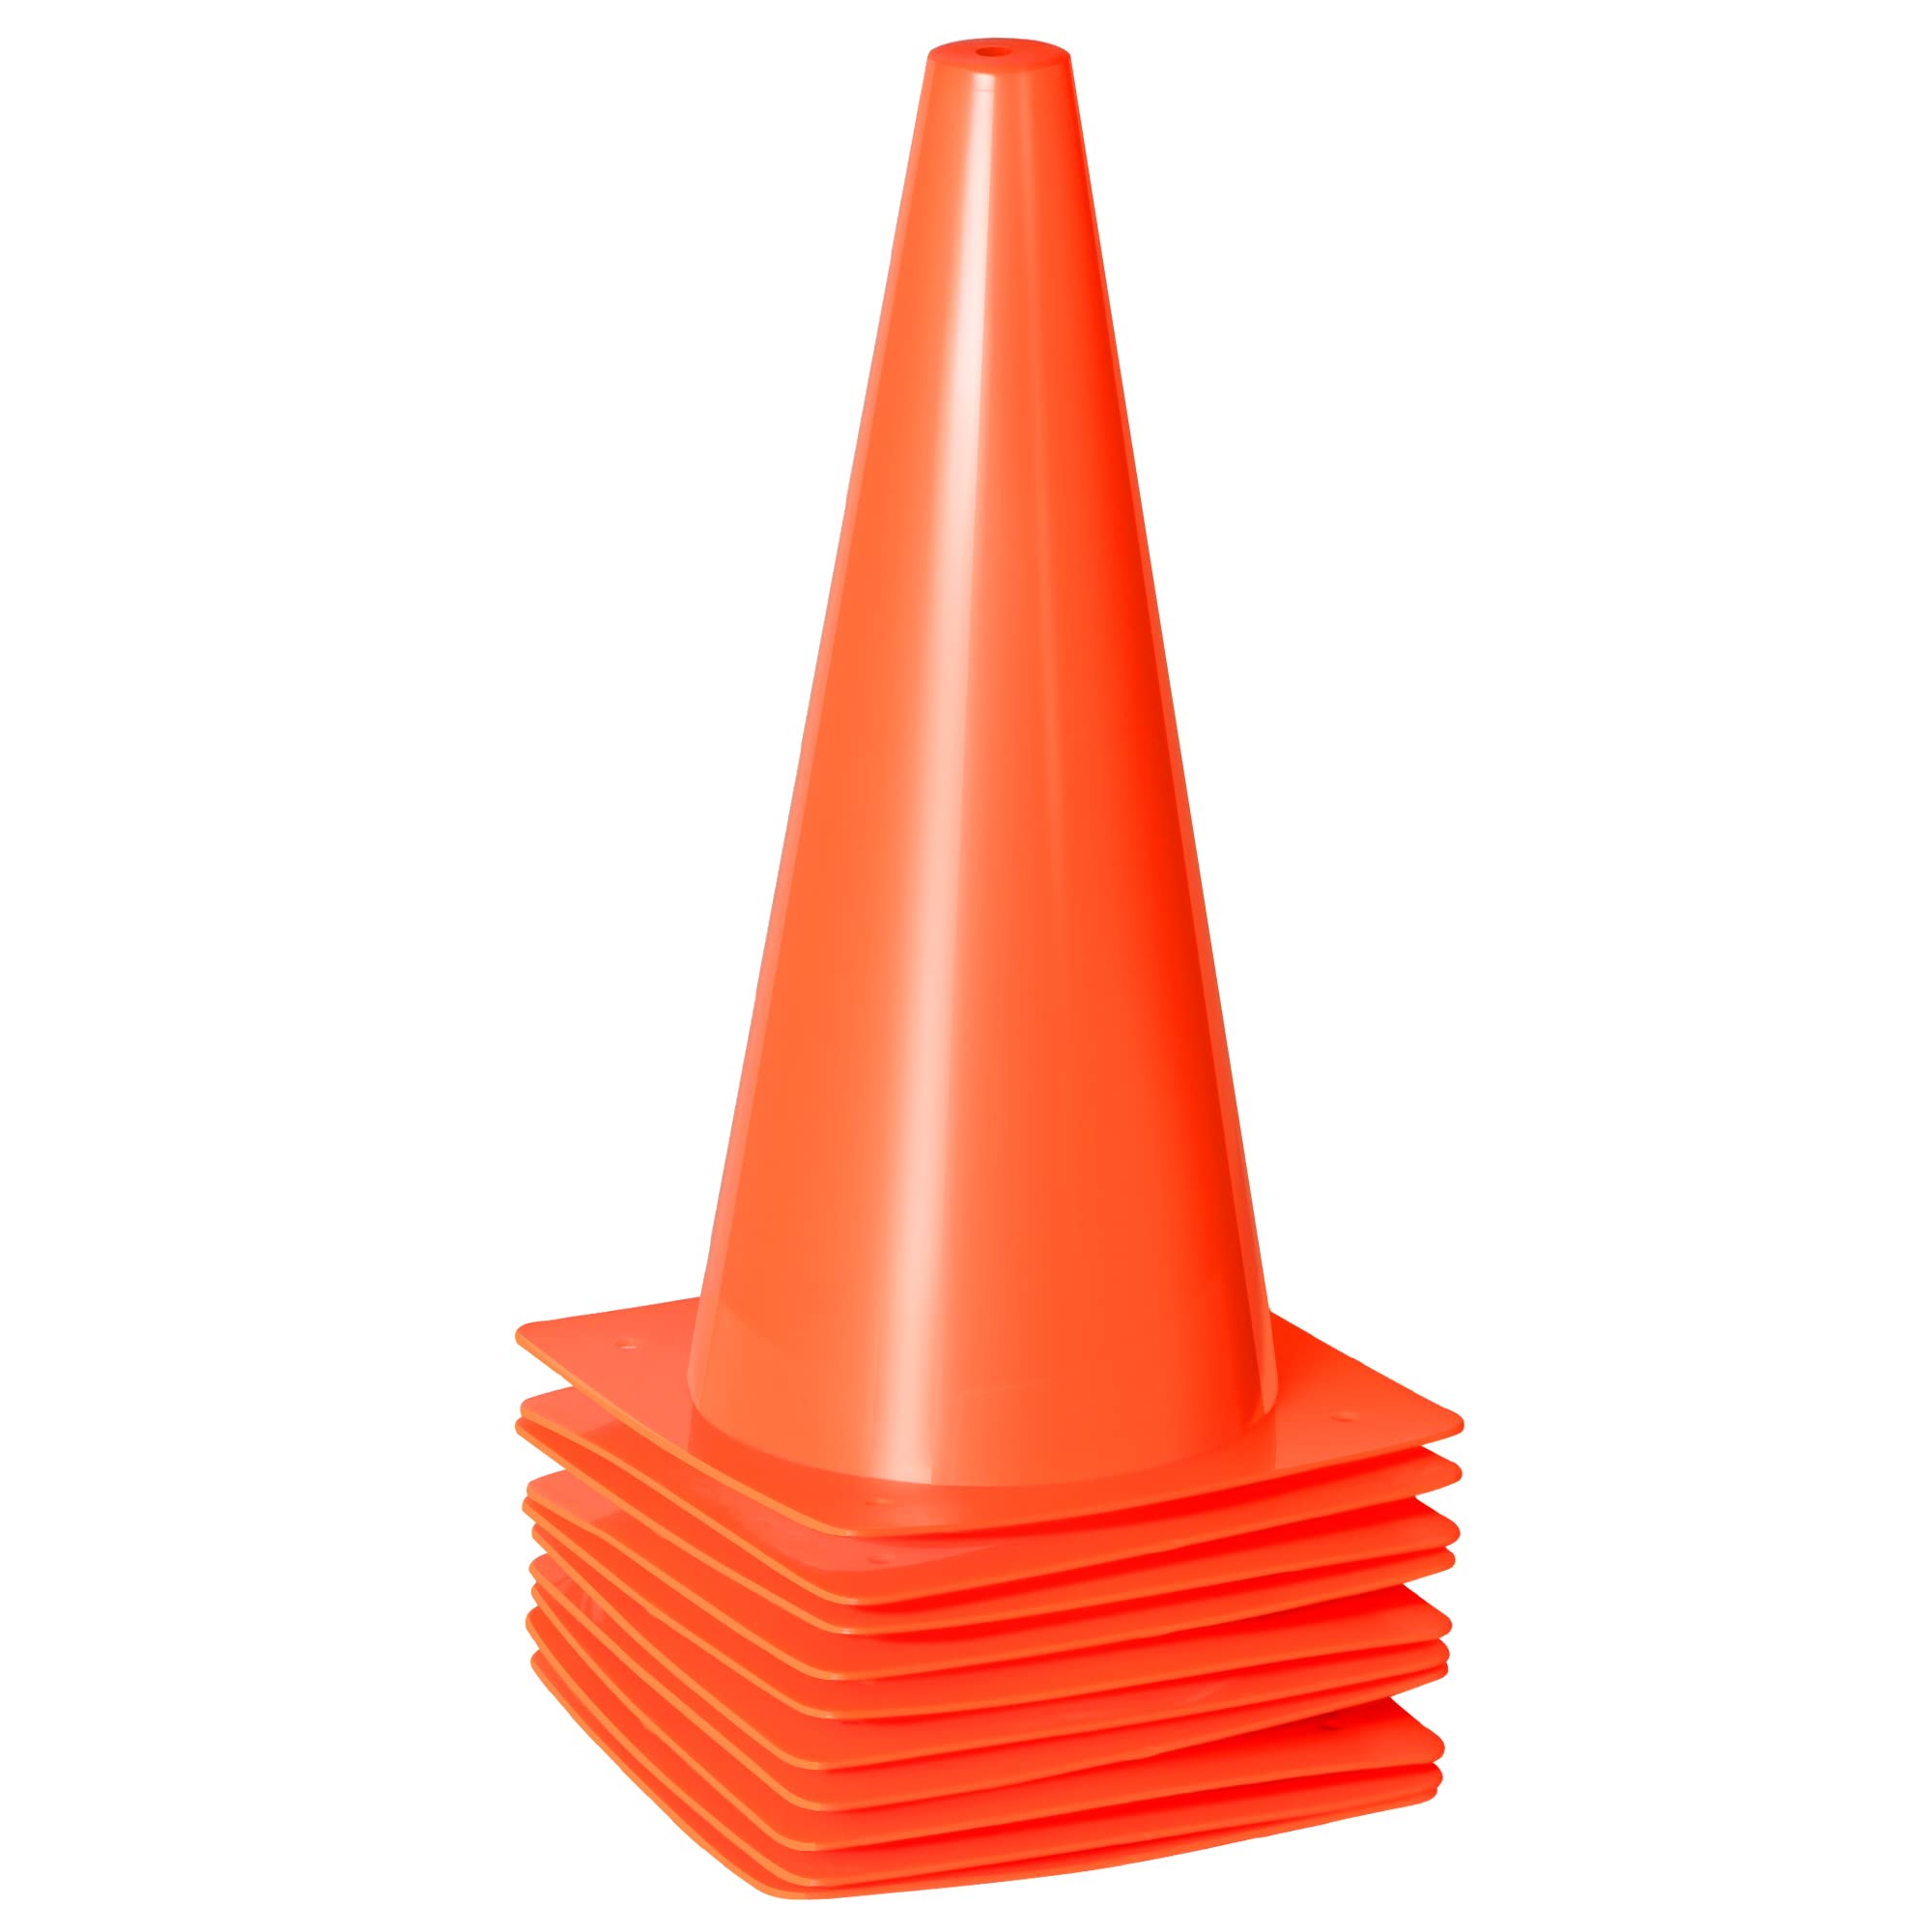 12 Inch Traffic Training Sports Cones, [10 Pack] Orange Safety Cones, Soccer Basketball Cones for Drills, Plastic Marker Cones for Indoor/Outdoor Activity & Festive Events